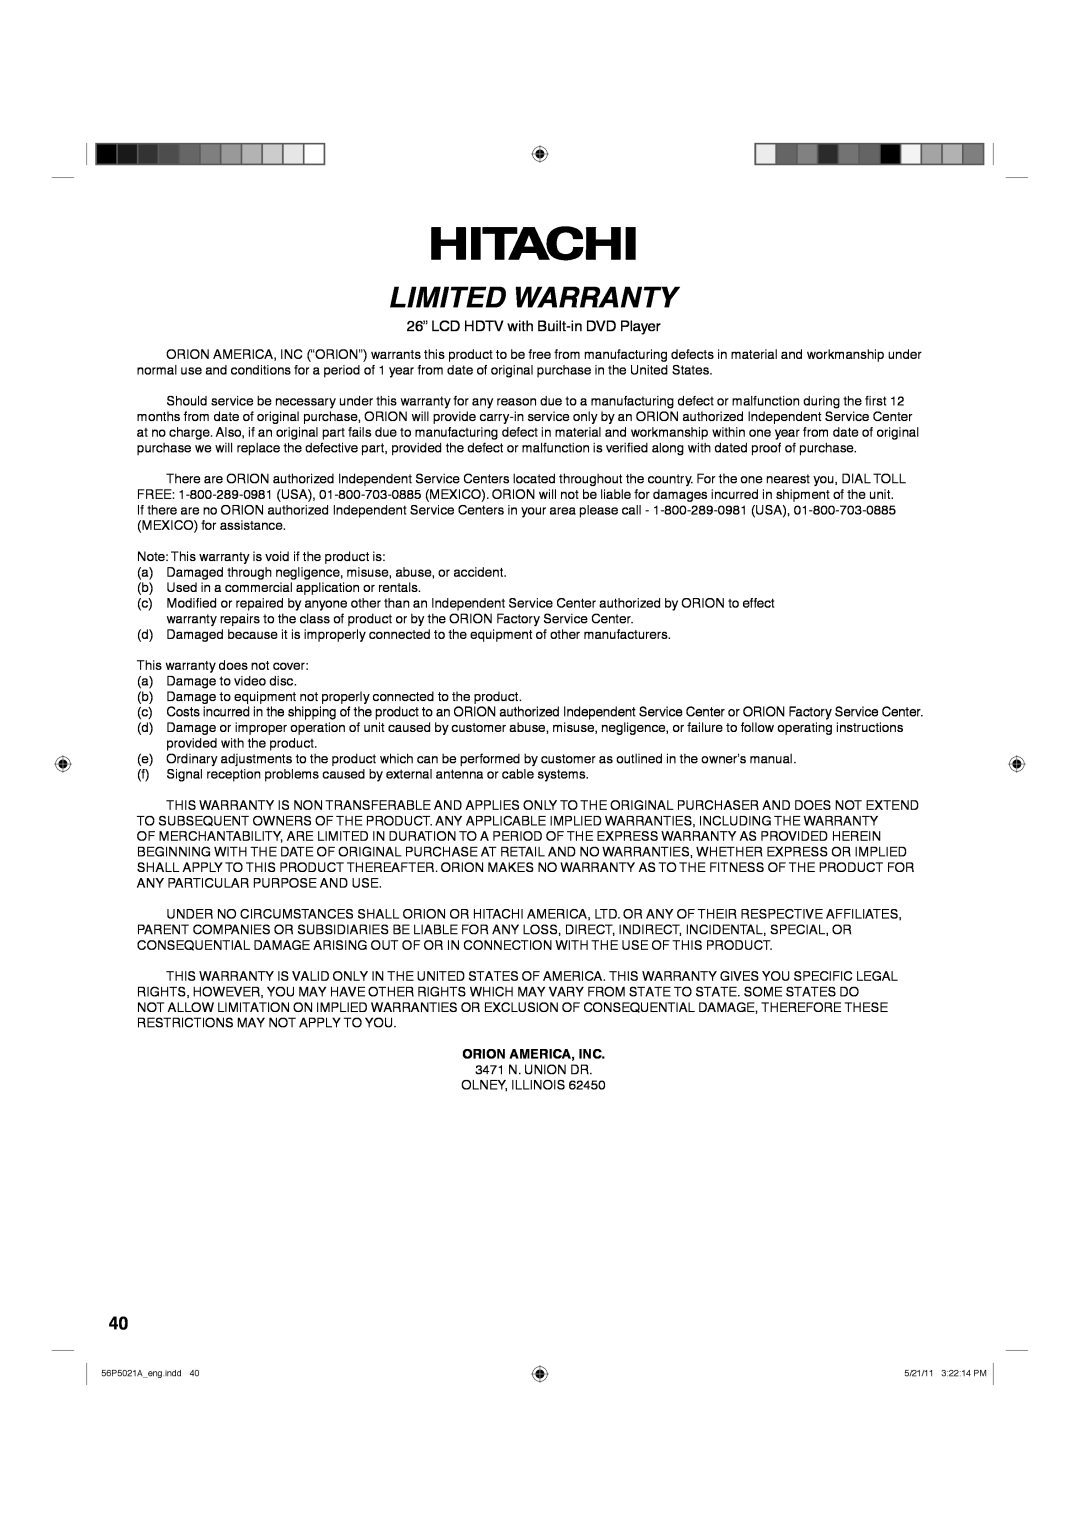 Hitachi L26D205 important safety instructions Limited Warranty, 26” LCD HDTV with Built-in DVD Player, Orion America, Inc 